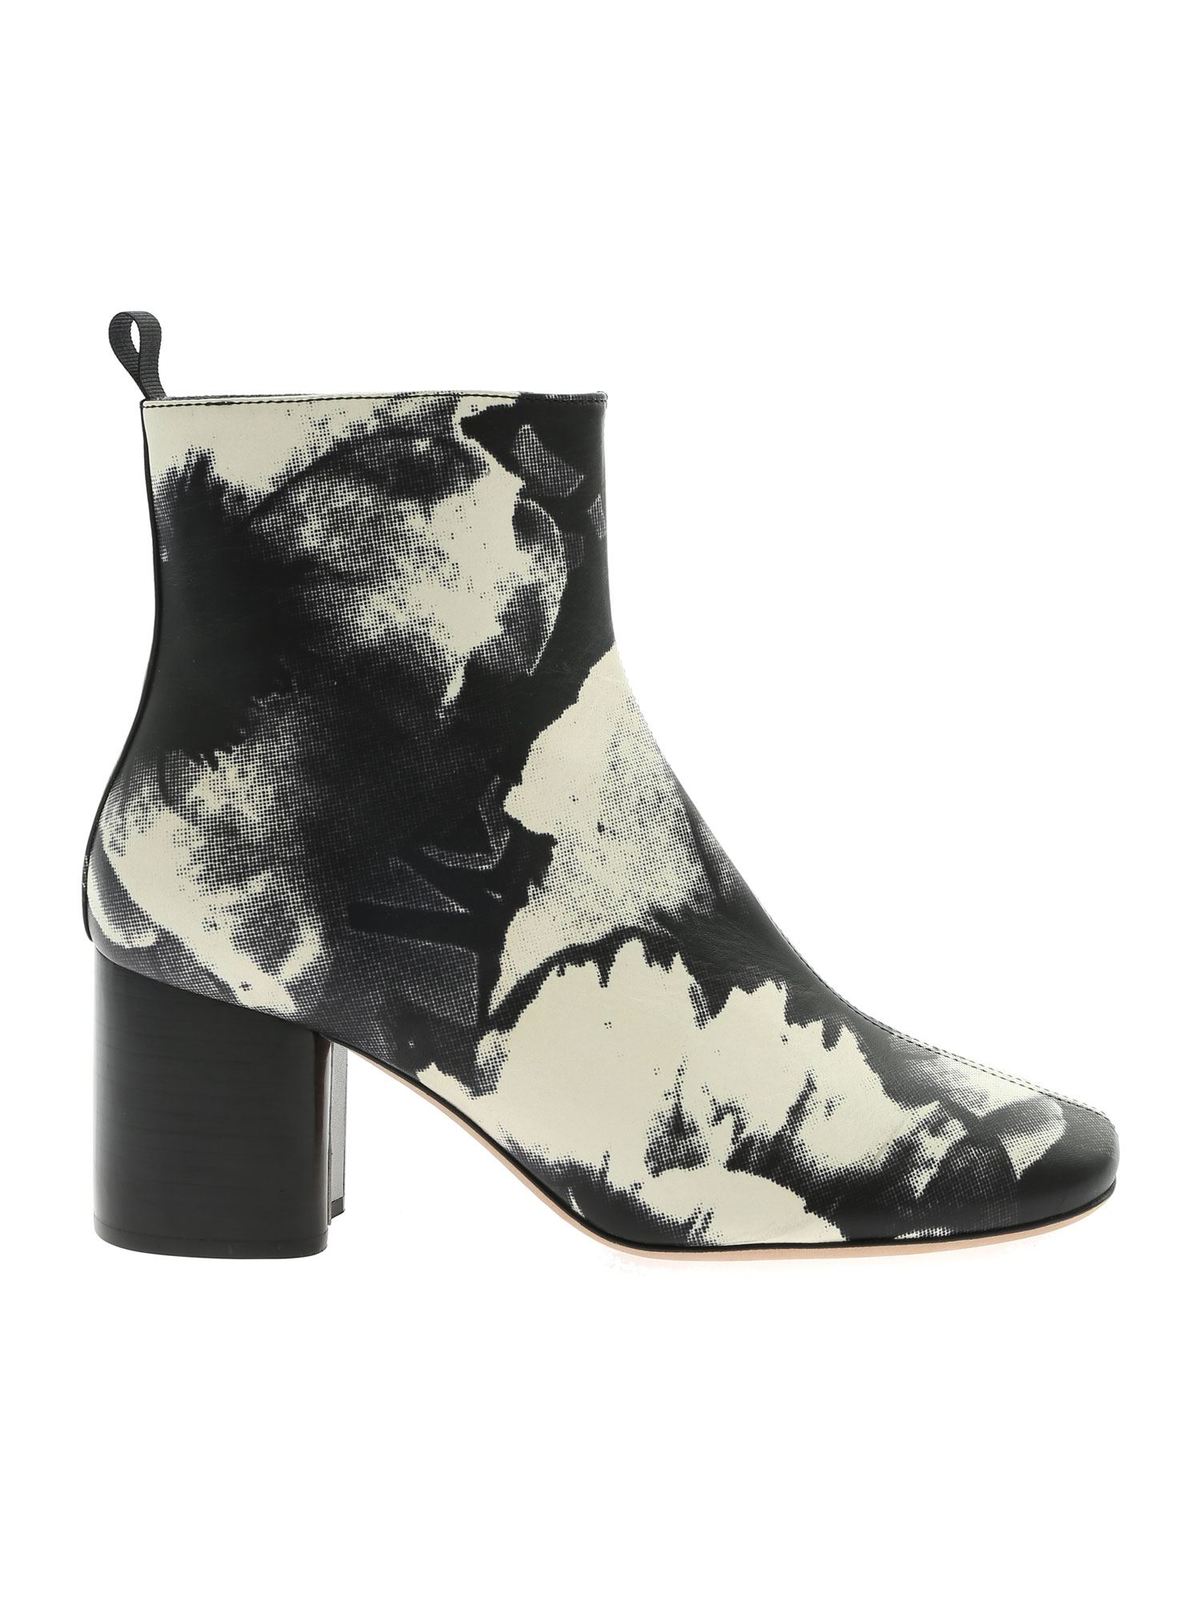 PAUL SMITH MOSS ROSE ANKLE BOOTS IN BLACK